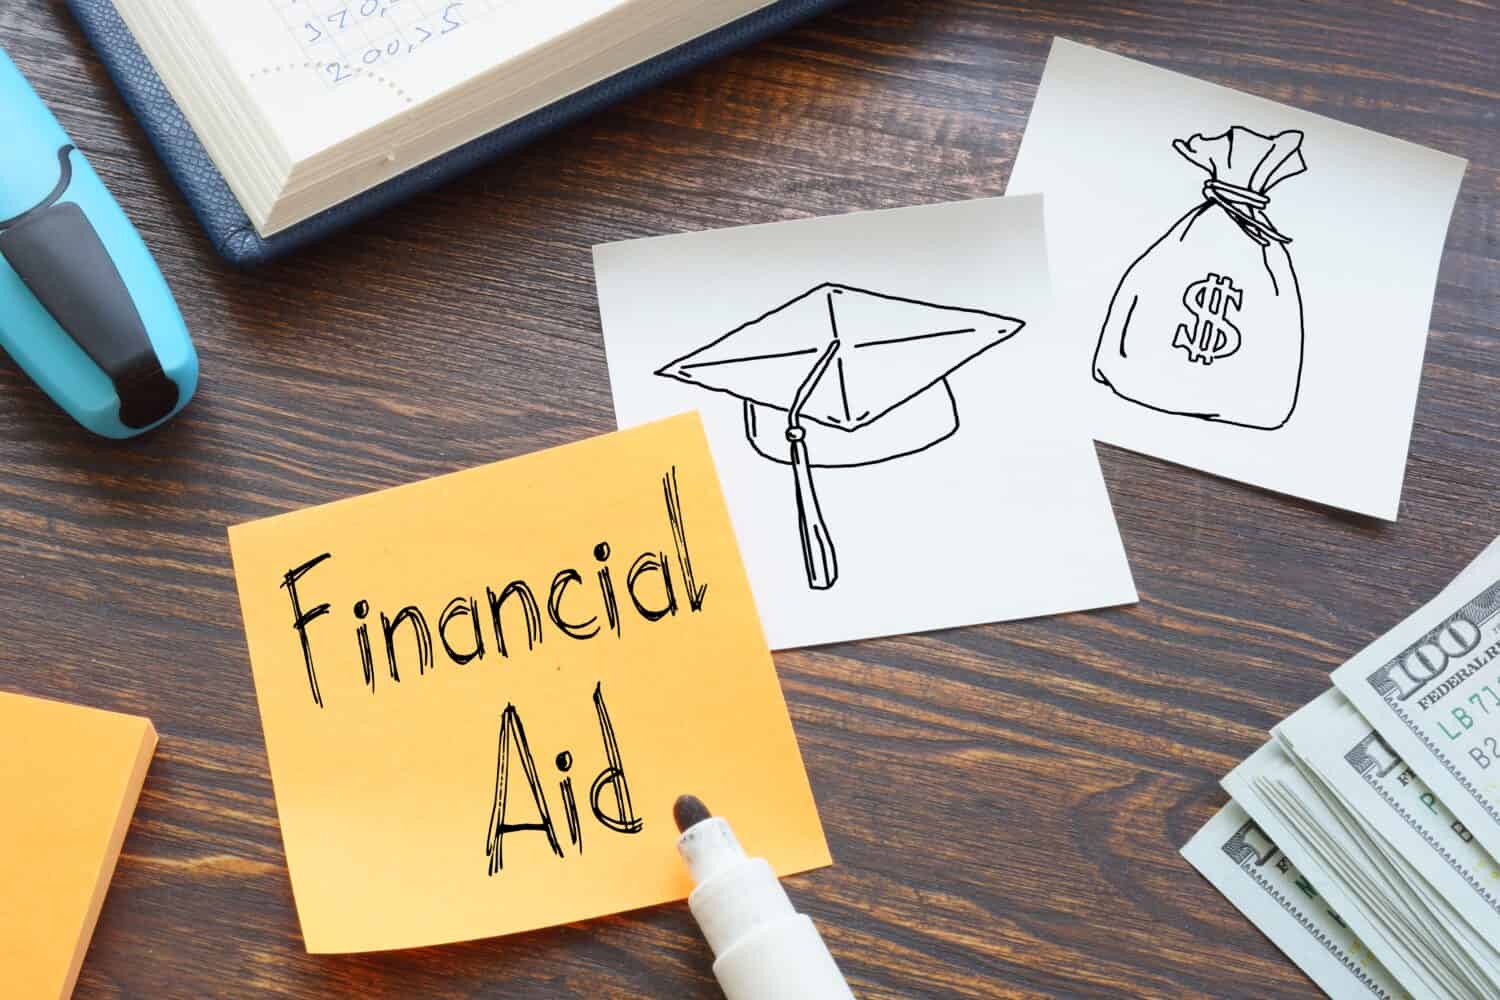 Financial aid is shown on a business photo using the text